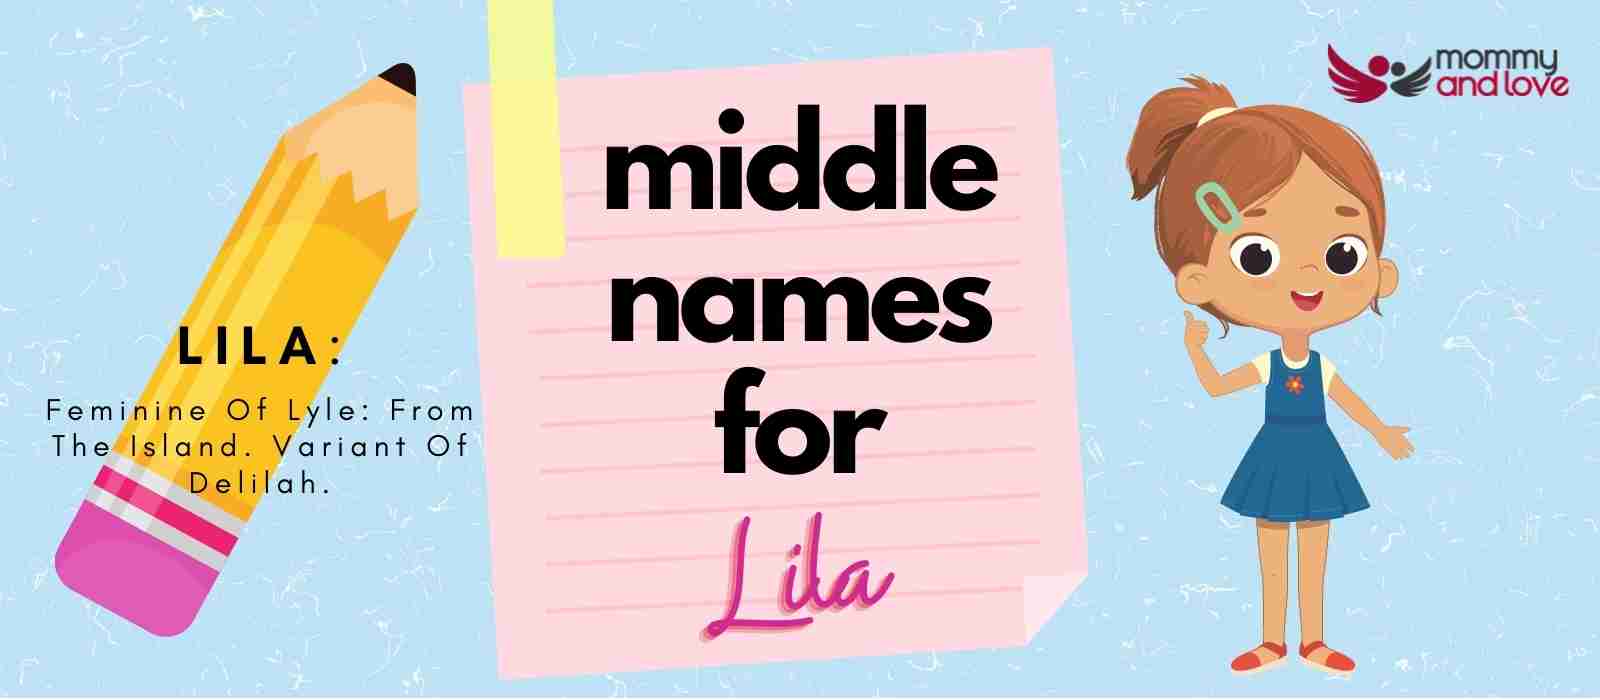 Middle Names for Lila